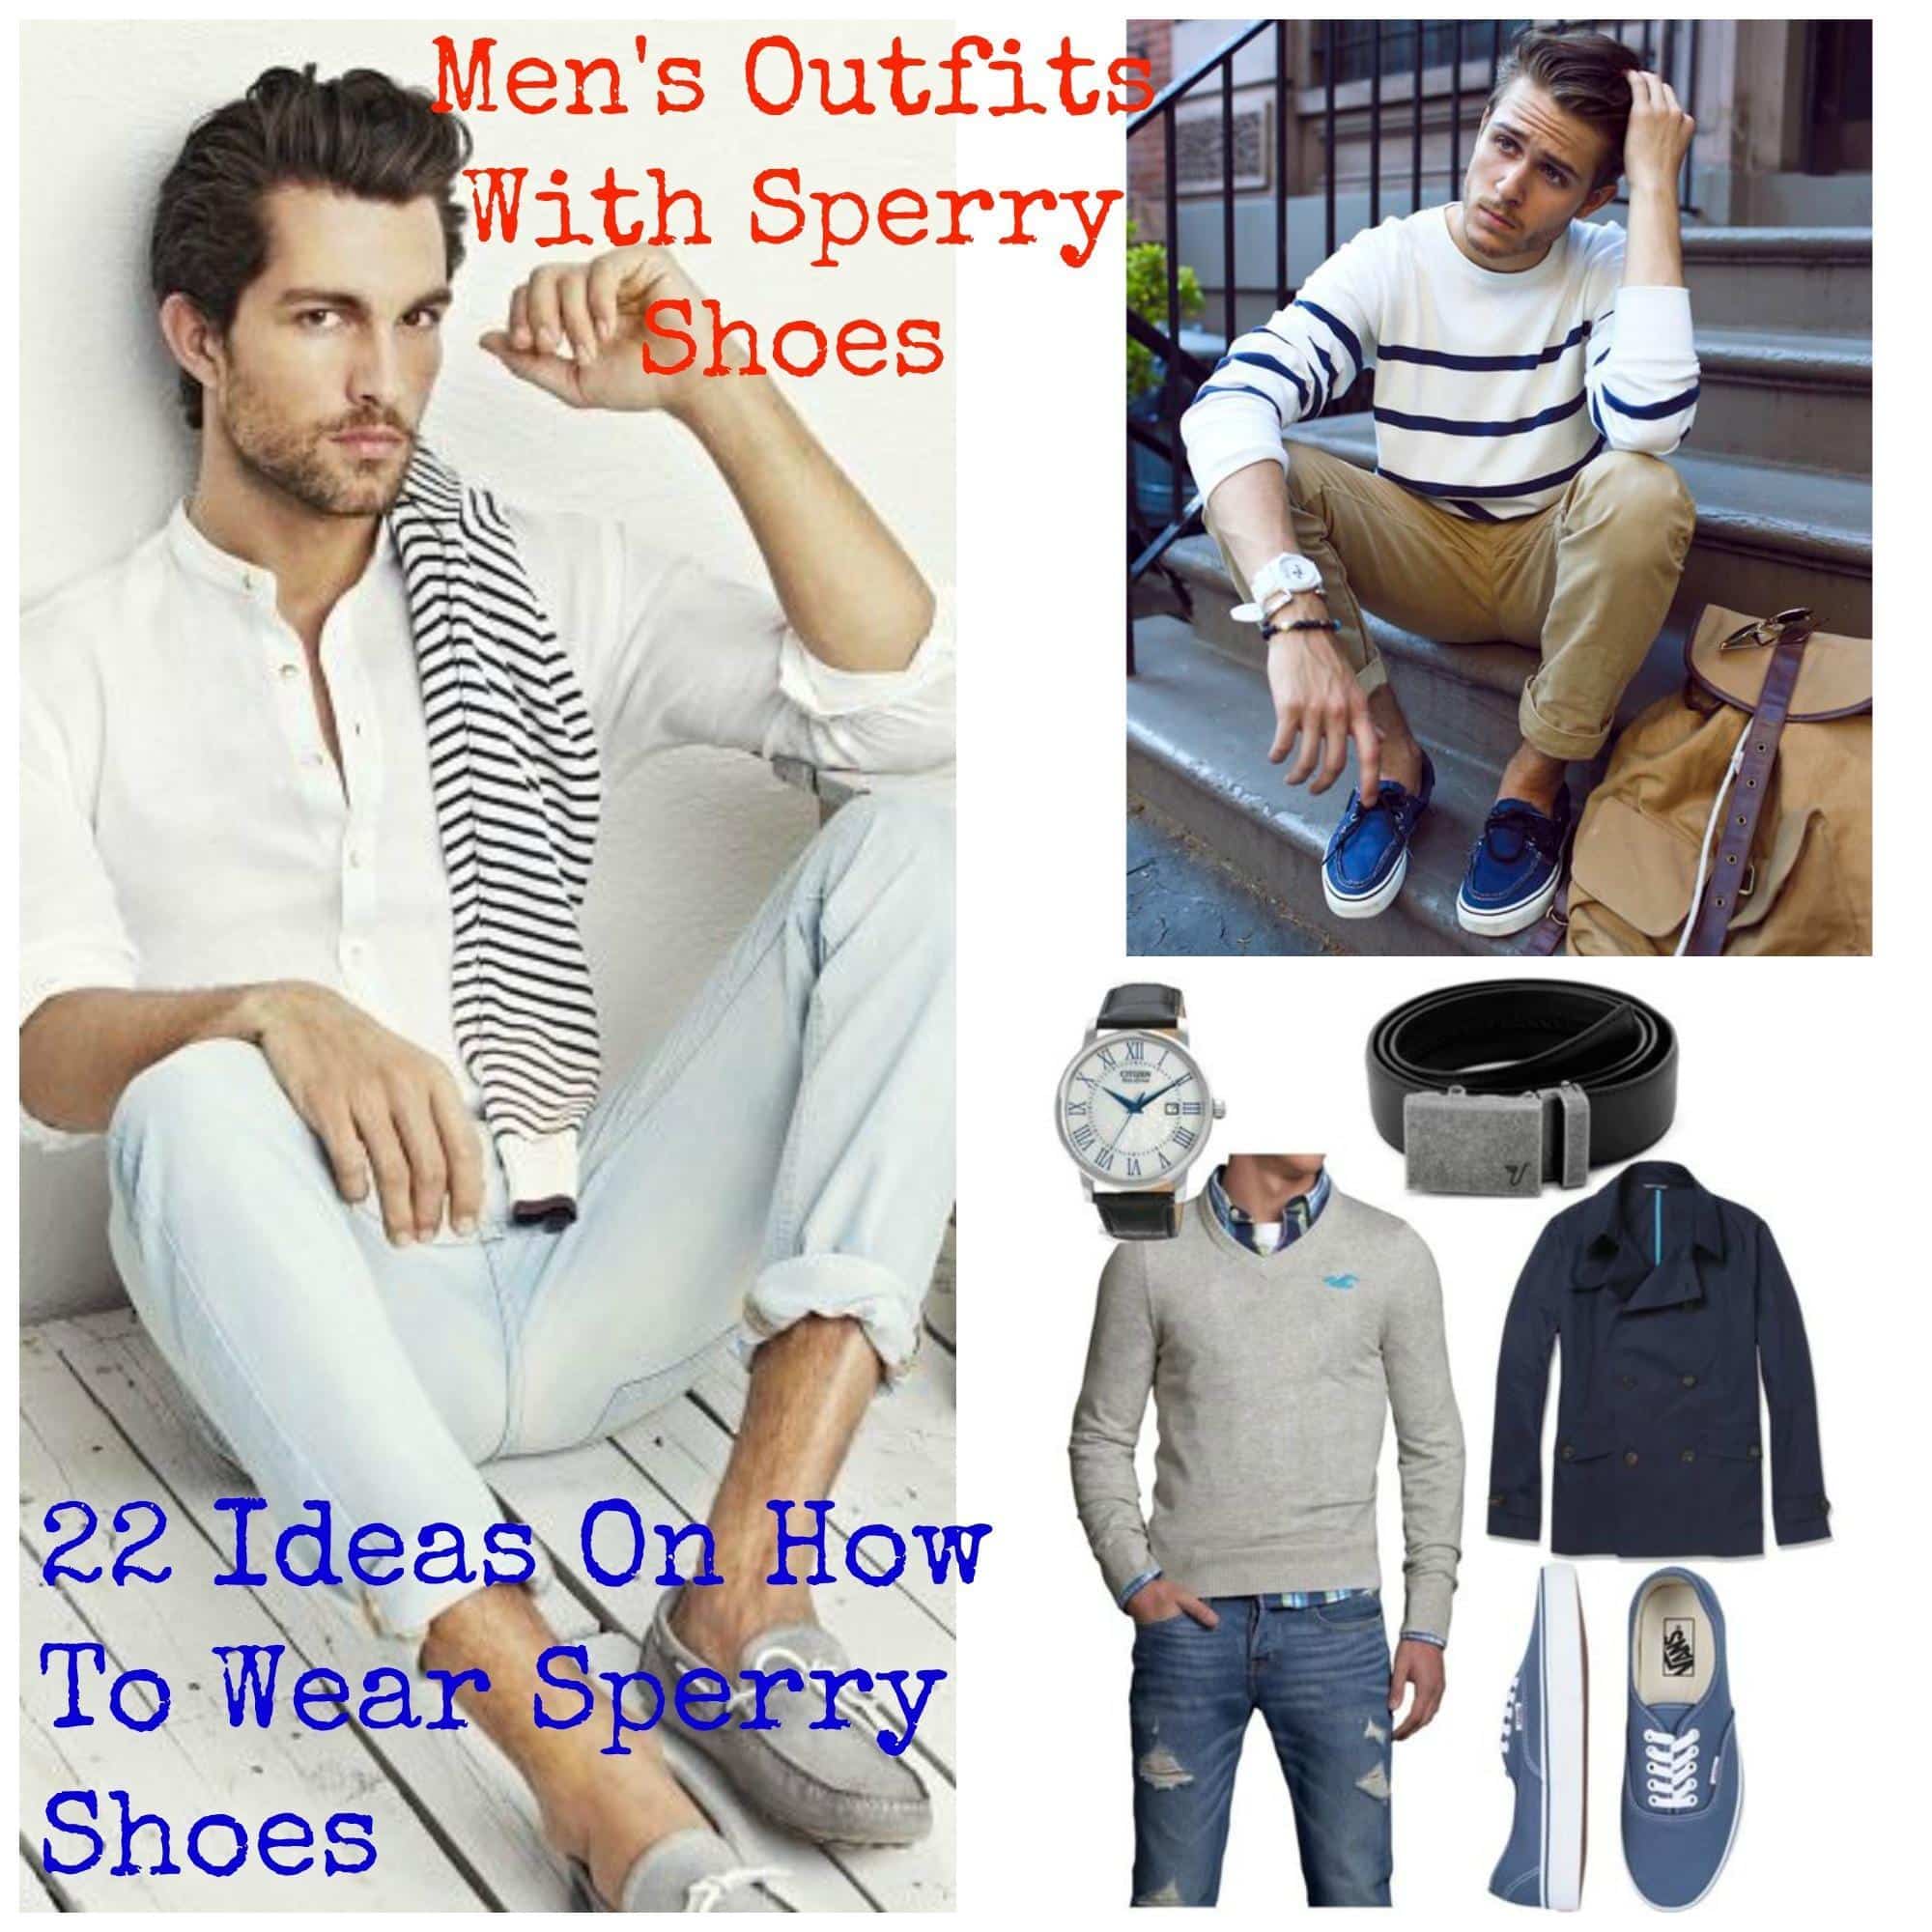 Mens Outfits With Sperry Shoes-22 Ideas On How To Wear Sperry Shoes